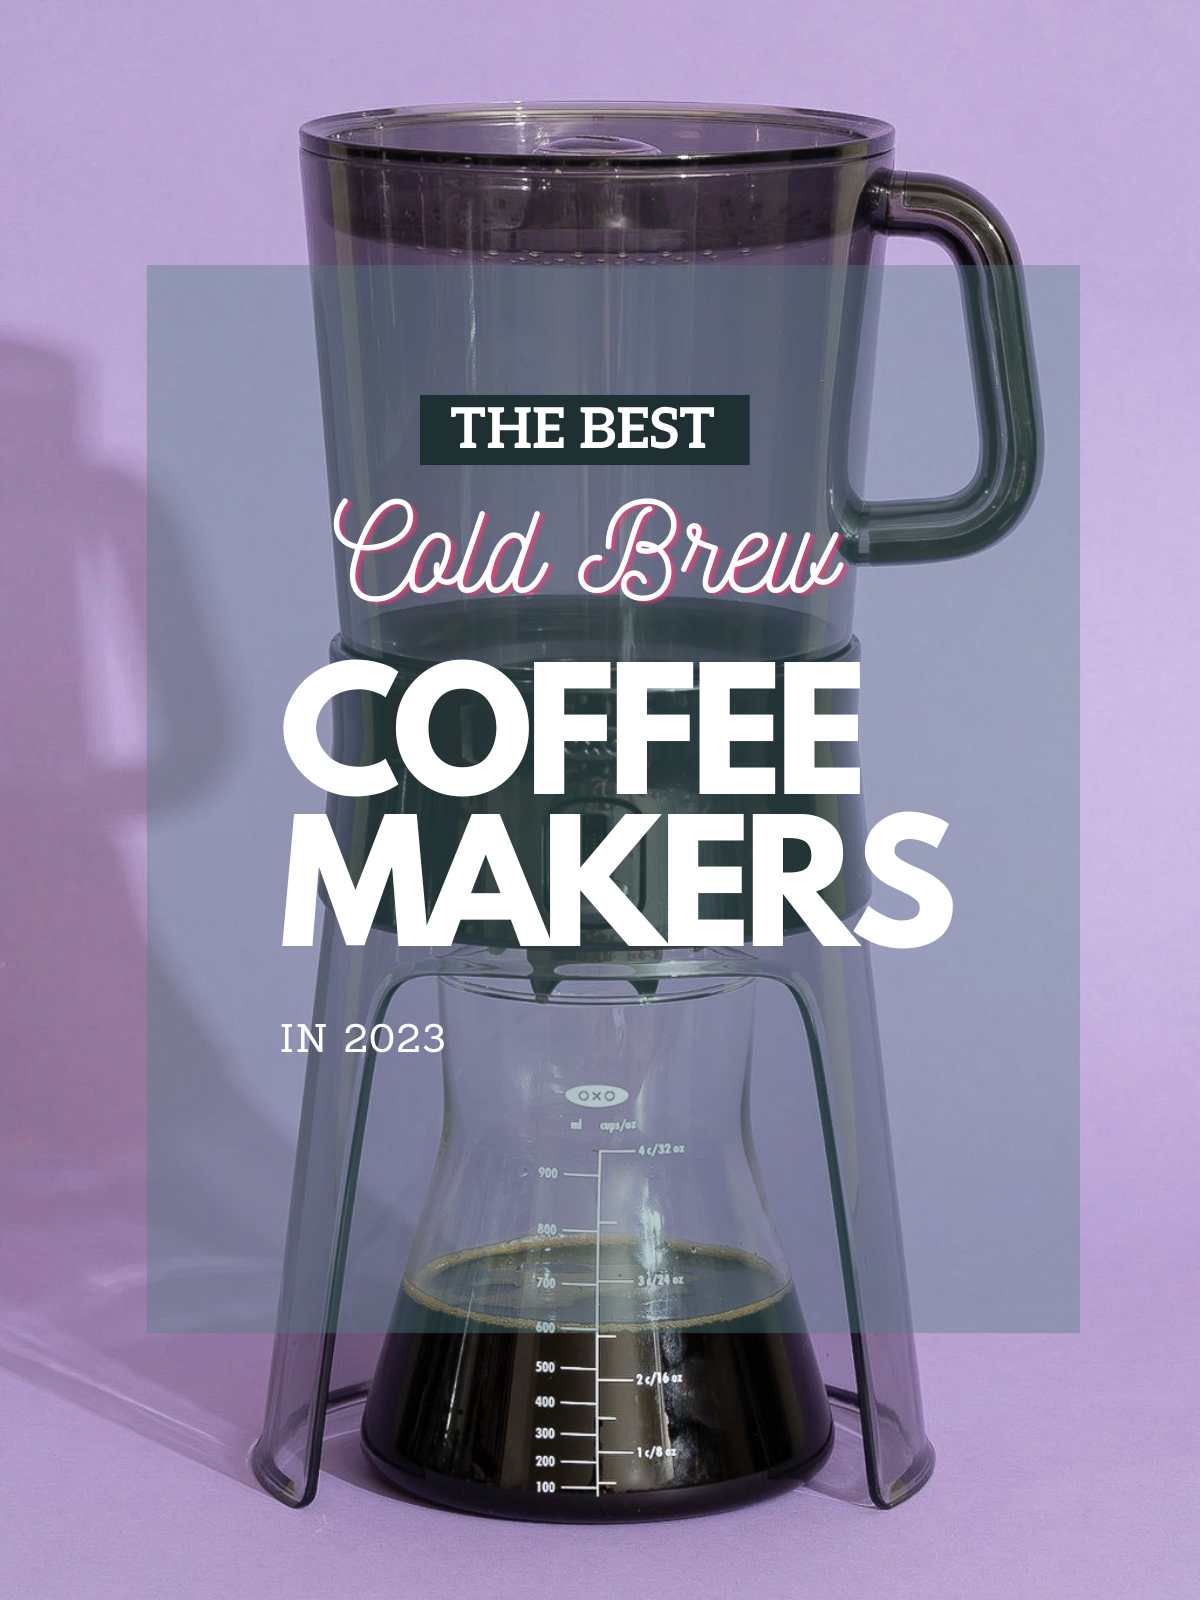 Best Cold Brew Coffee Makers in 2023